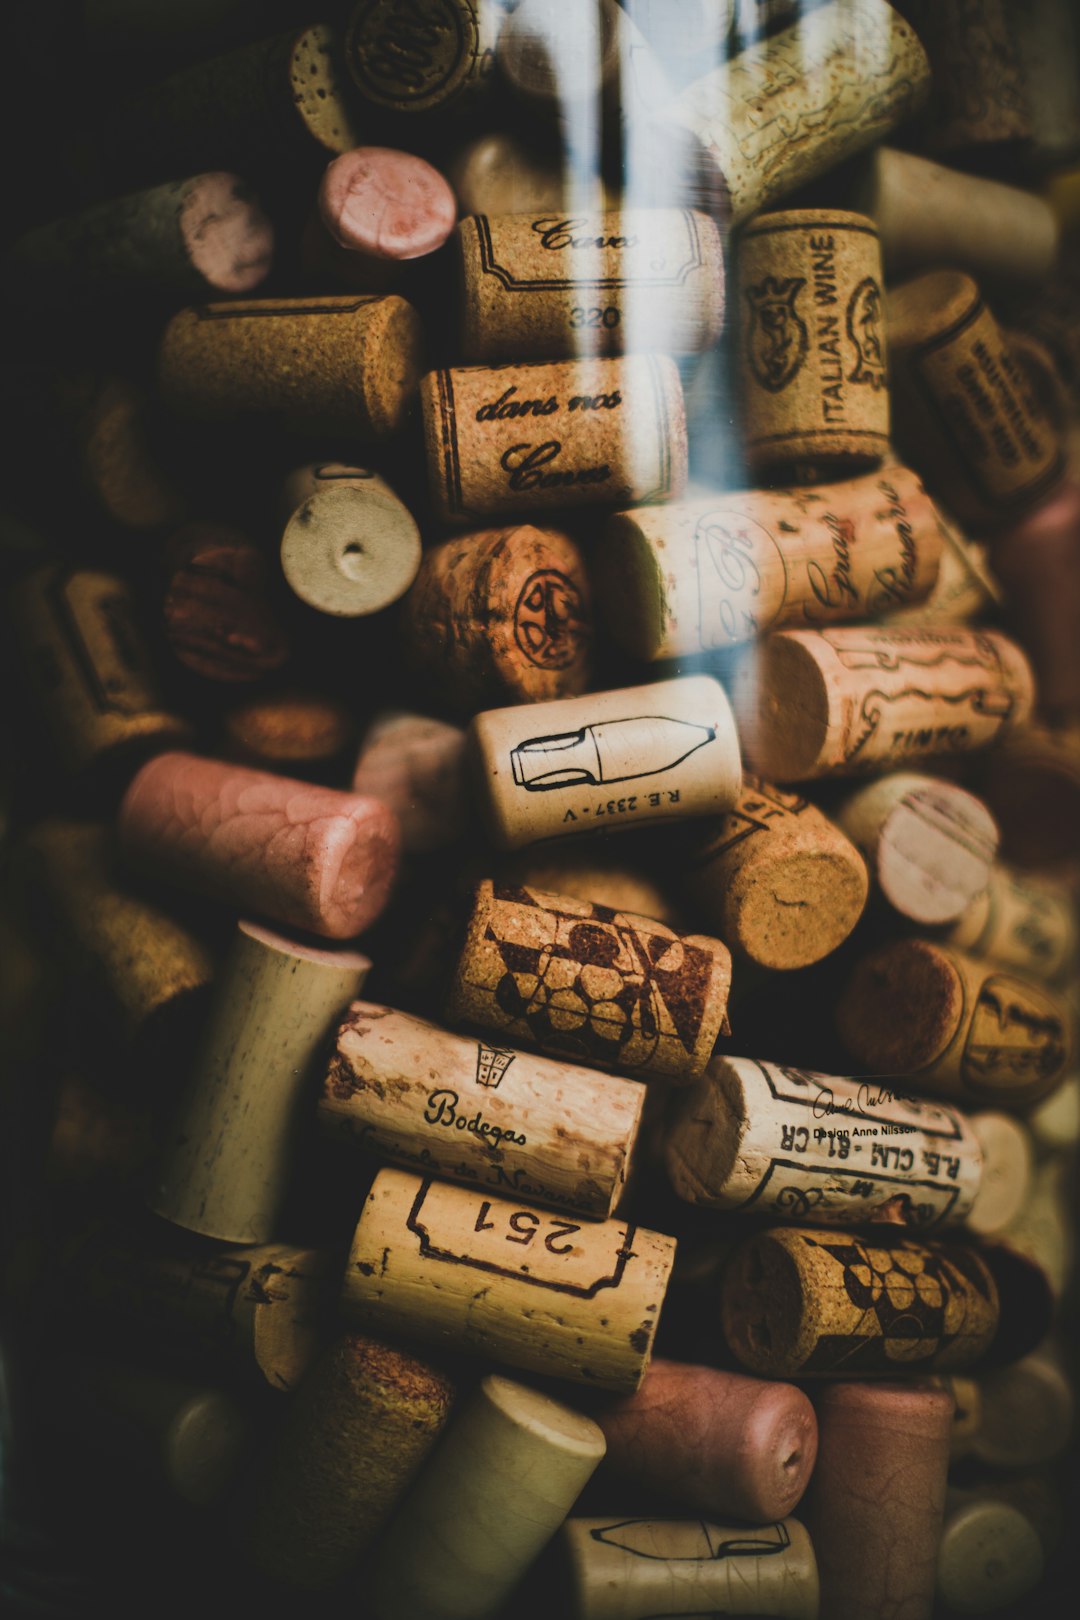 Beautiful textures of cork stoppers caught my interest and I just had to take this shot. Picture was taken next to a window, natural daylight looks brilliant to me.